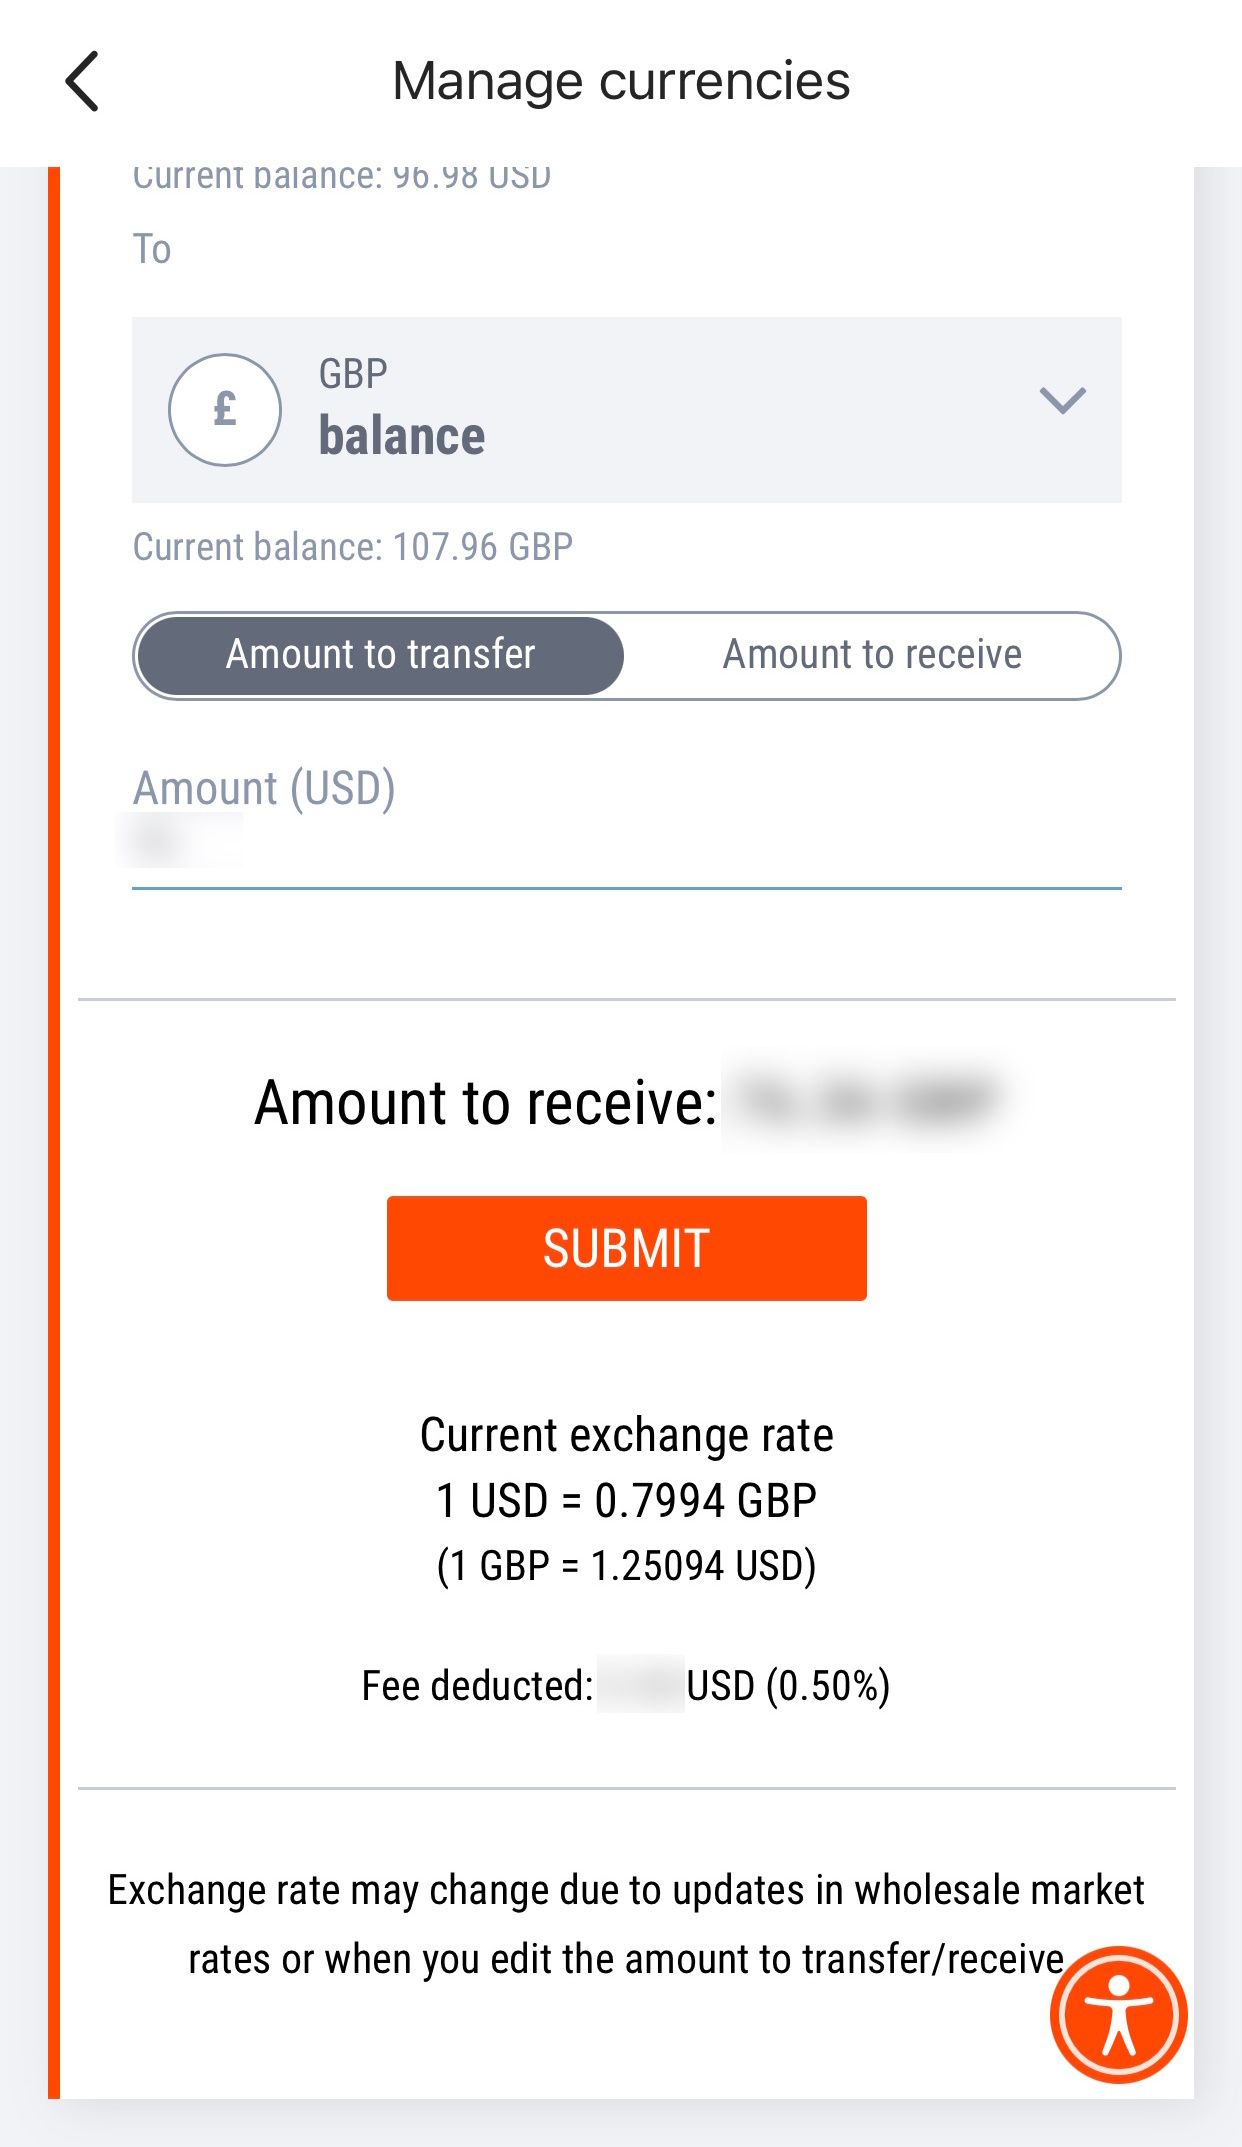 reviewing the balance transfer information on the Manage Currencies page on the Payoneer app